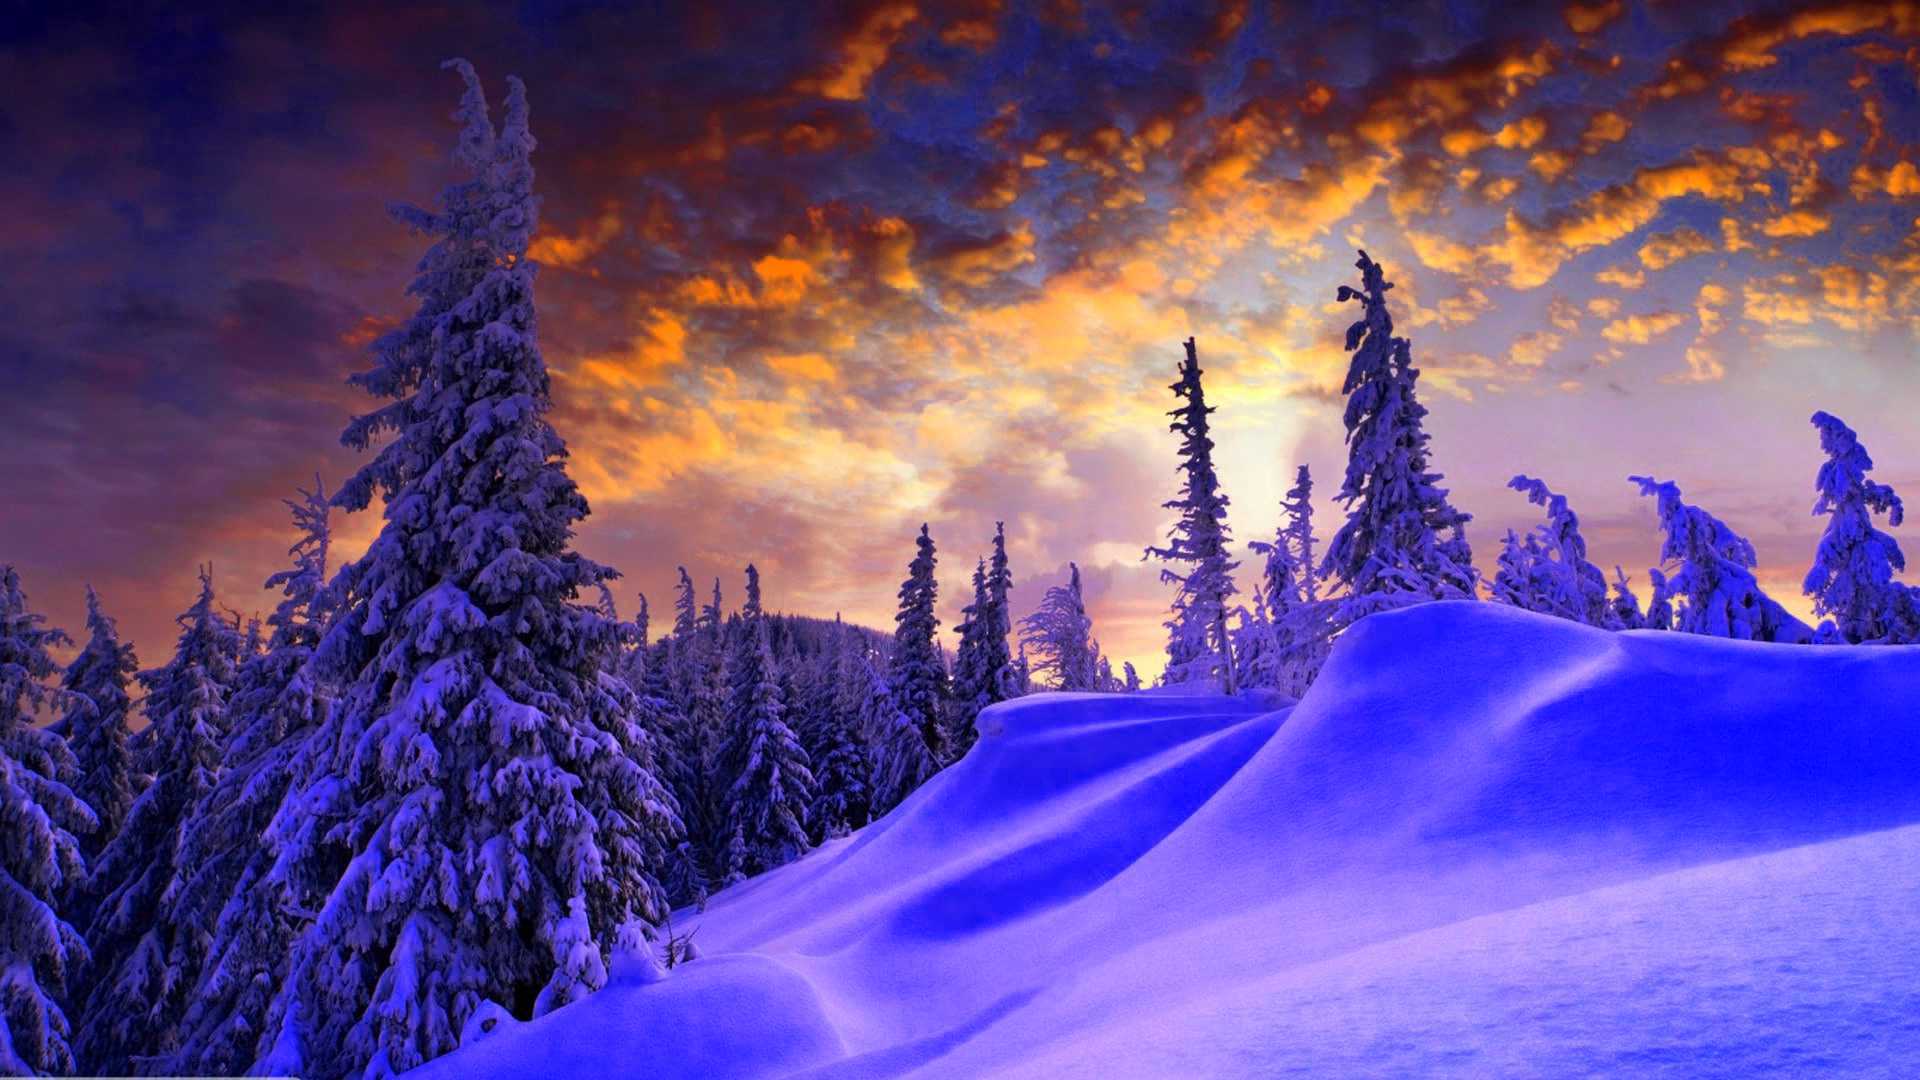 Snowy trees in the sunset wallpaper 1920x1080 - Winter